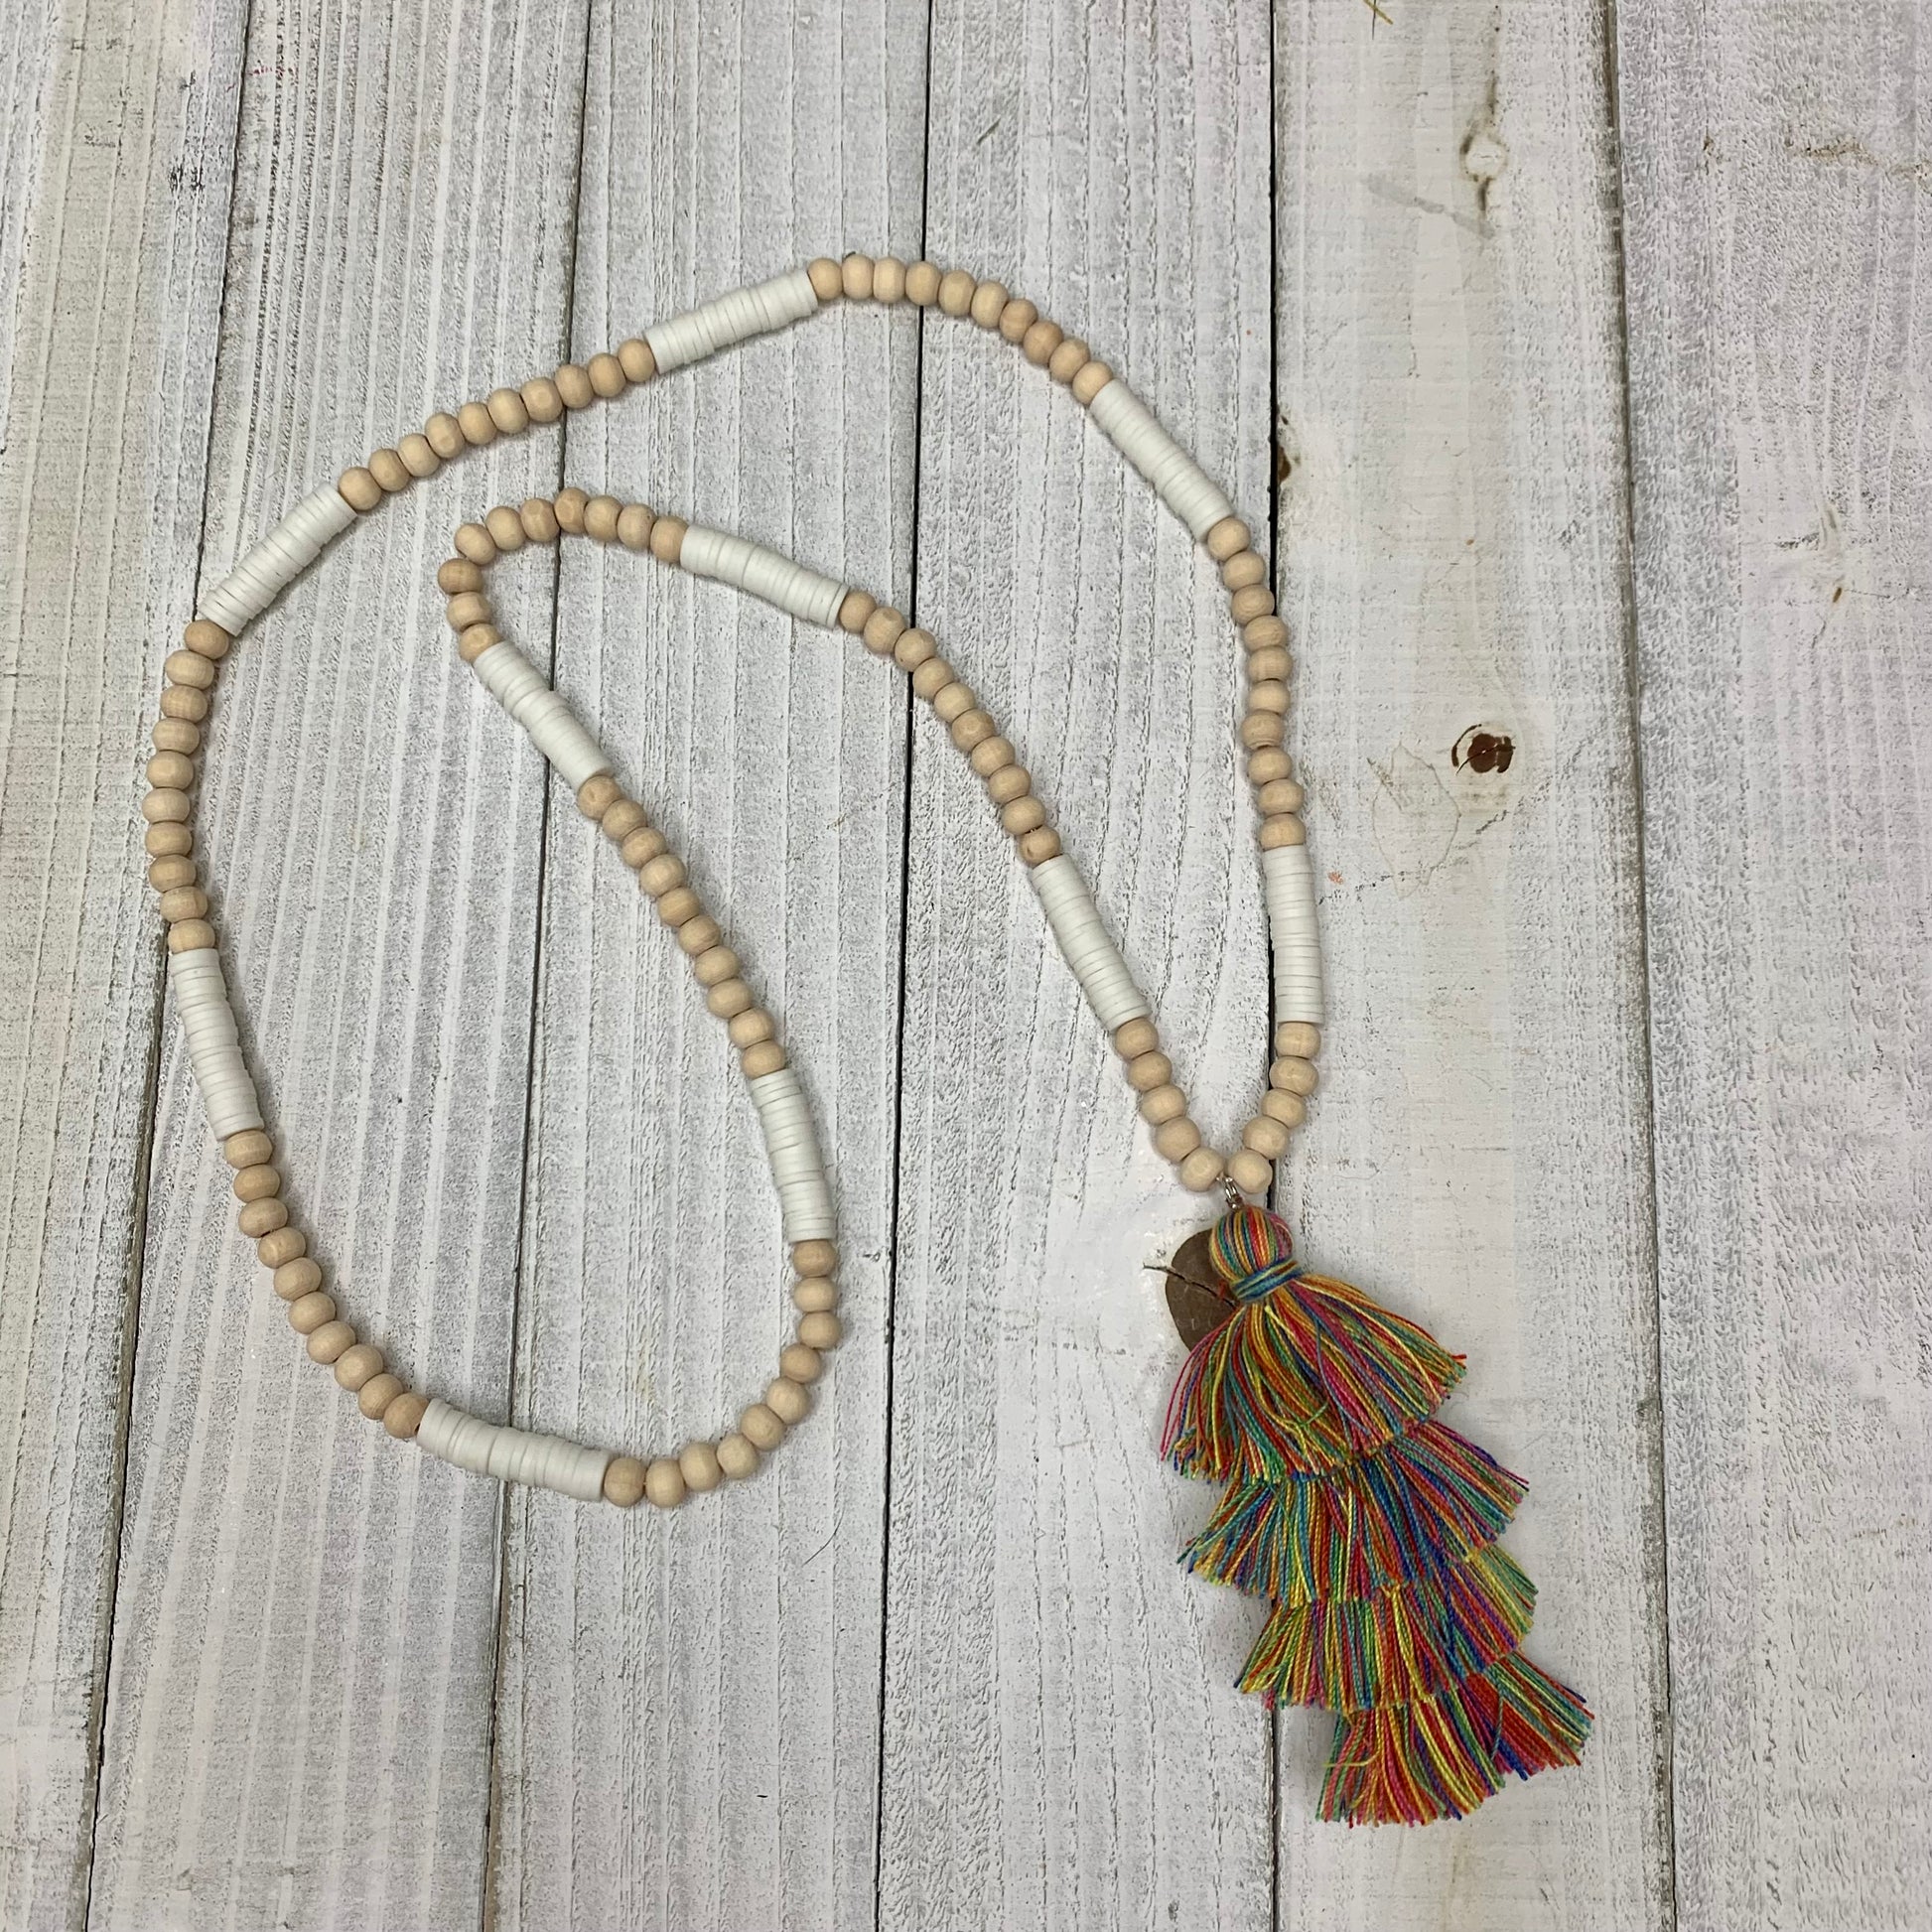 Wooden Round Beads, White Doughnut Beads with a Colorful Cotton Tassel Necklace